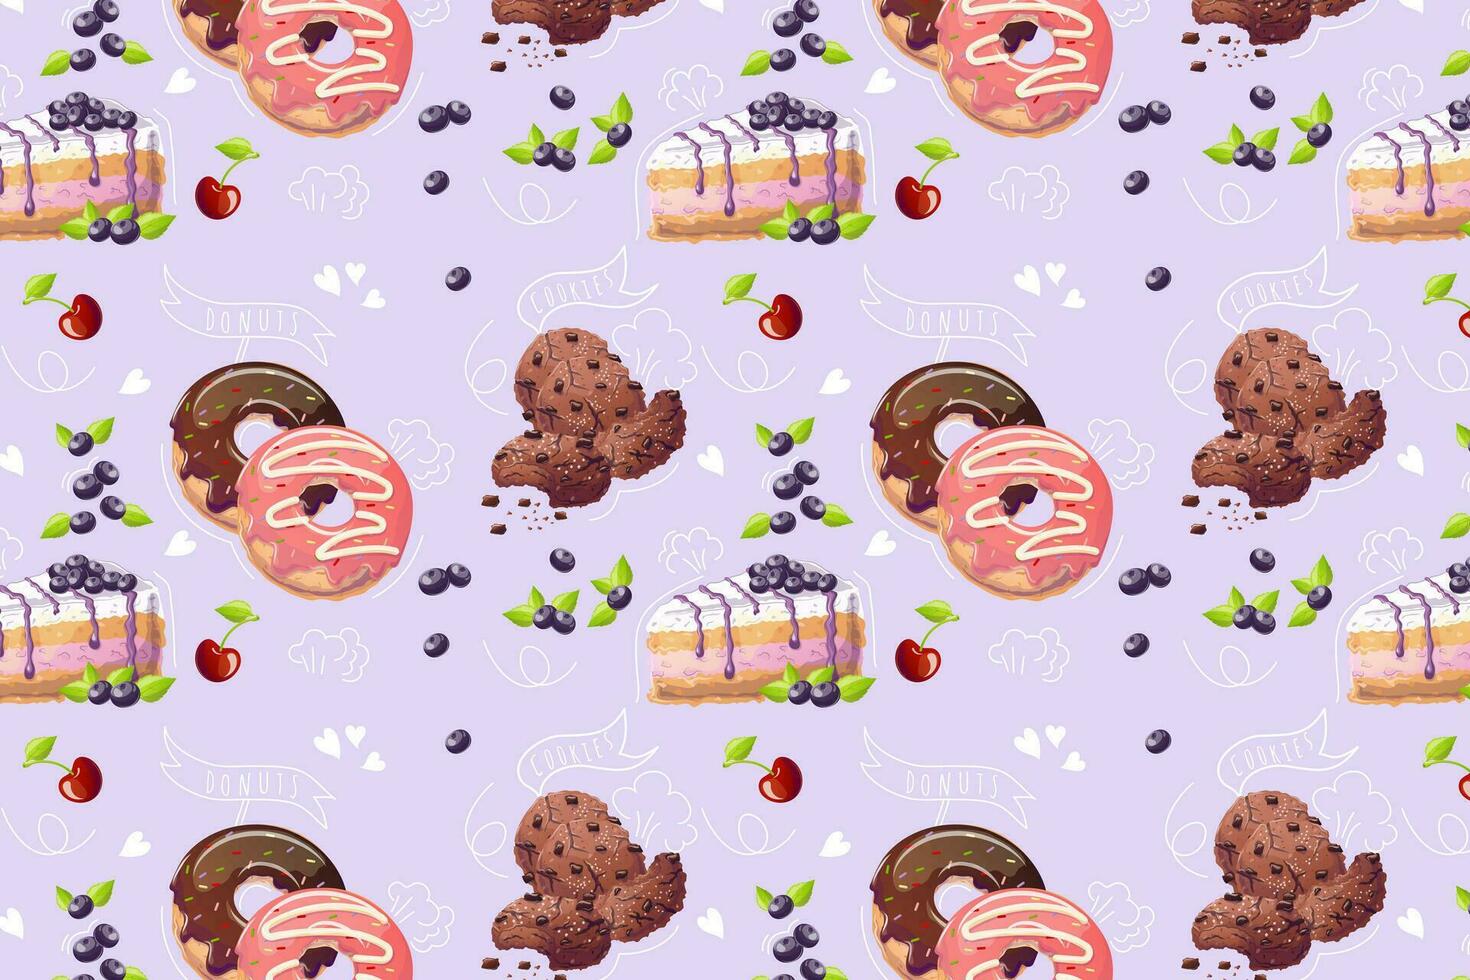 Cartoon style confectionery pattern on purple background. Doodle. Vector illustration for bakery, poster, banner, website, advertisement. Vector illustration with colorful sweet dessert.